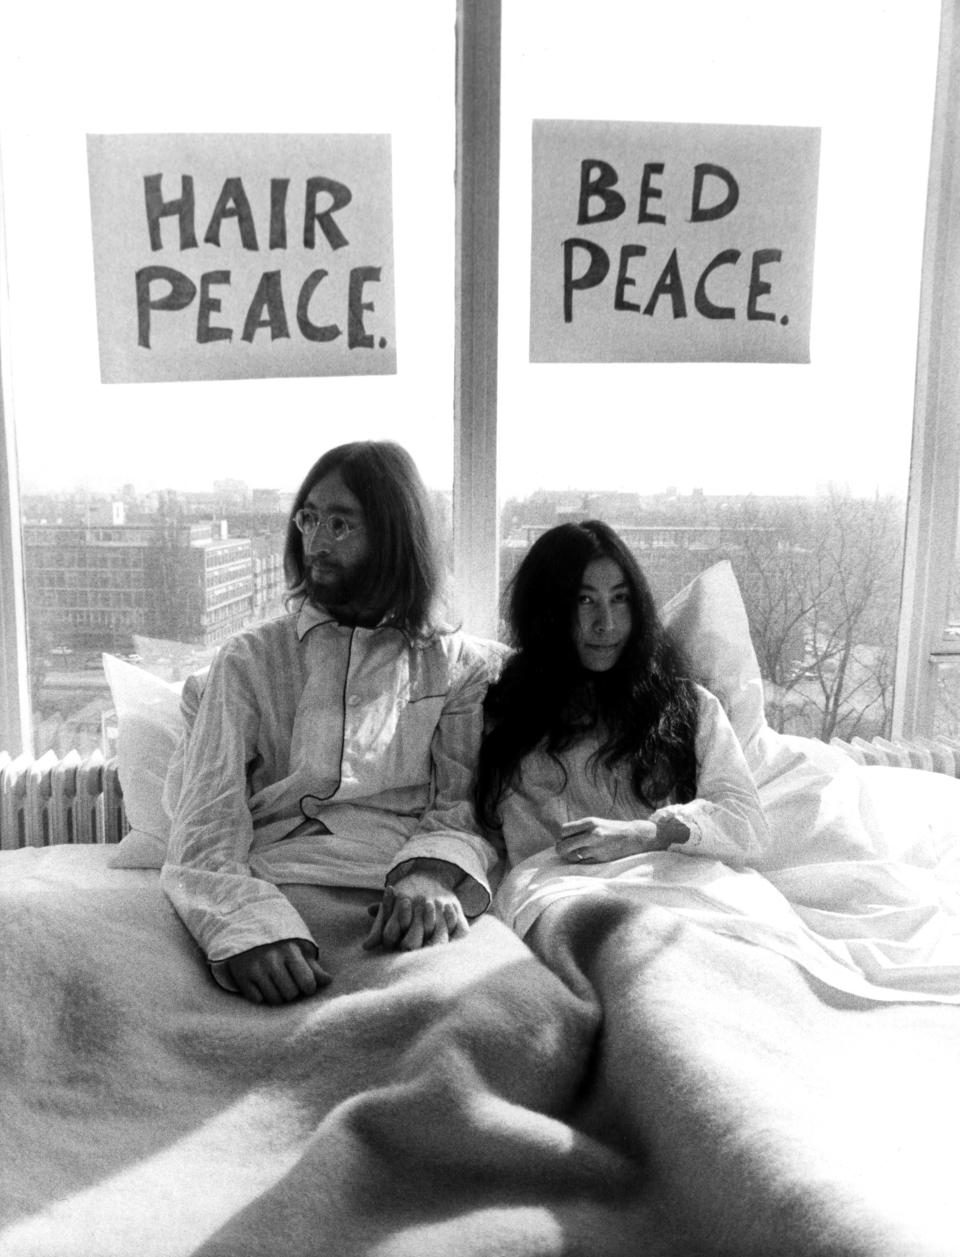 John Lennon and Yoko Ono at the “bed-in” in the Presidential Suite of the Hilton hotel in the Netherlands, March 26, 1969